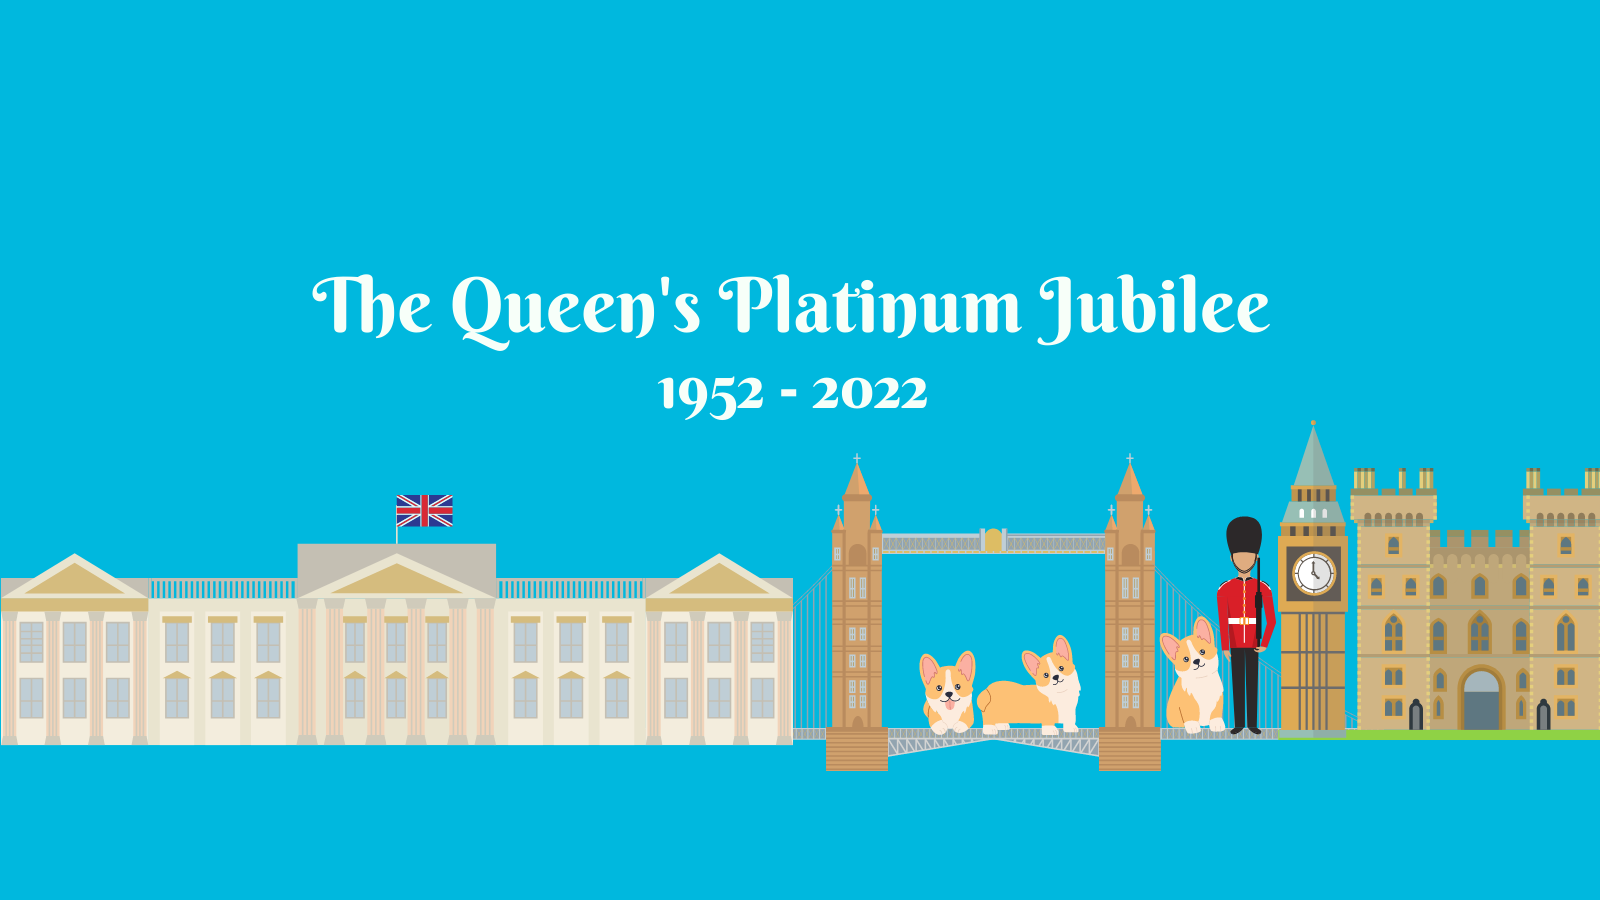 Text that reads 'the queen's platinum jubilee 1952 - 2022' with images of buckingham palace, tower bridge, corgies, the queens guard, big ben and the tower of london along the bottom